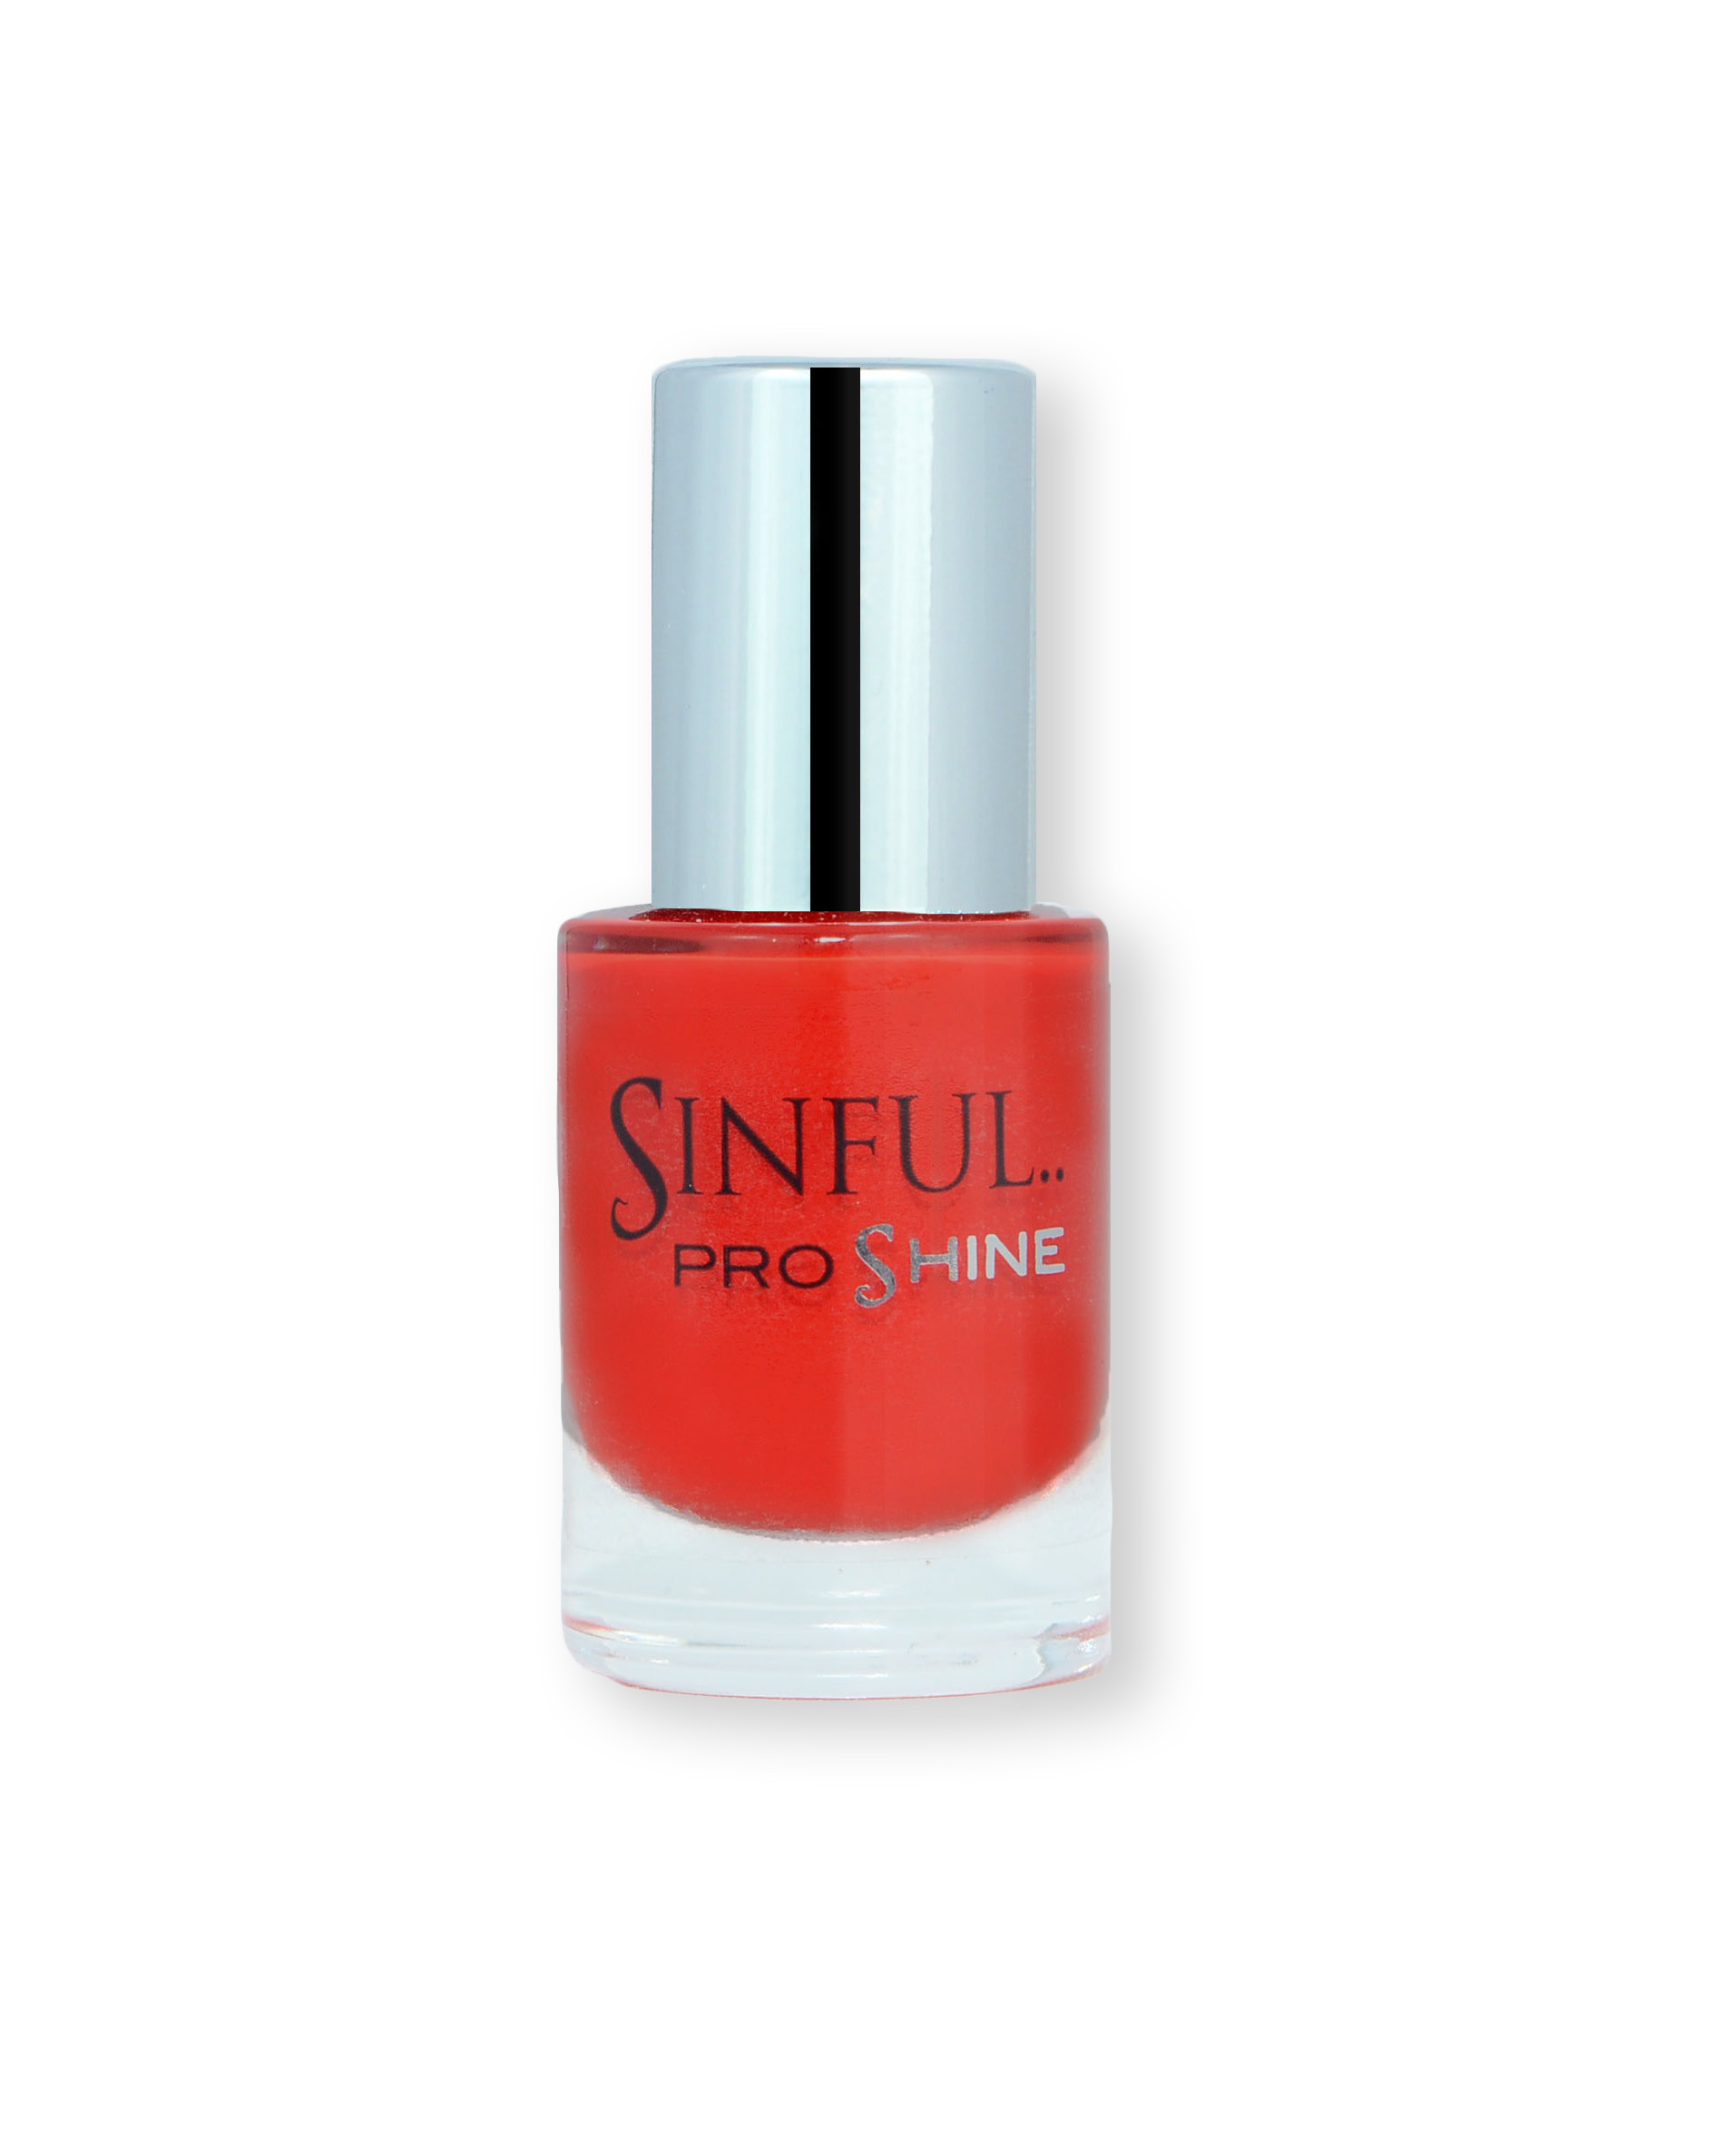 Sinful PROshine is a revolution into top spec imitation gel-like formula, easy application, full coverage and a sleek finish. Spoil yourself with the choice of 42 shades, expertly formulated with the finest grade of pigments. Pout: The perfect red carpet hue with a creme finish